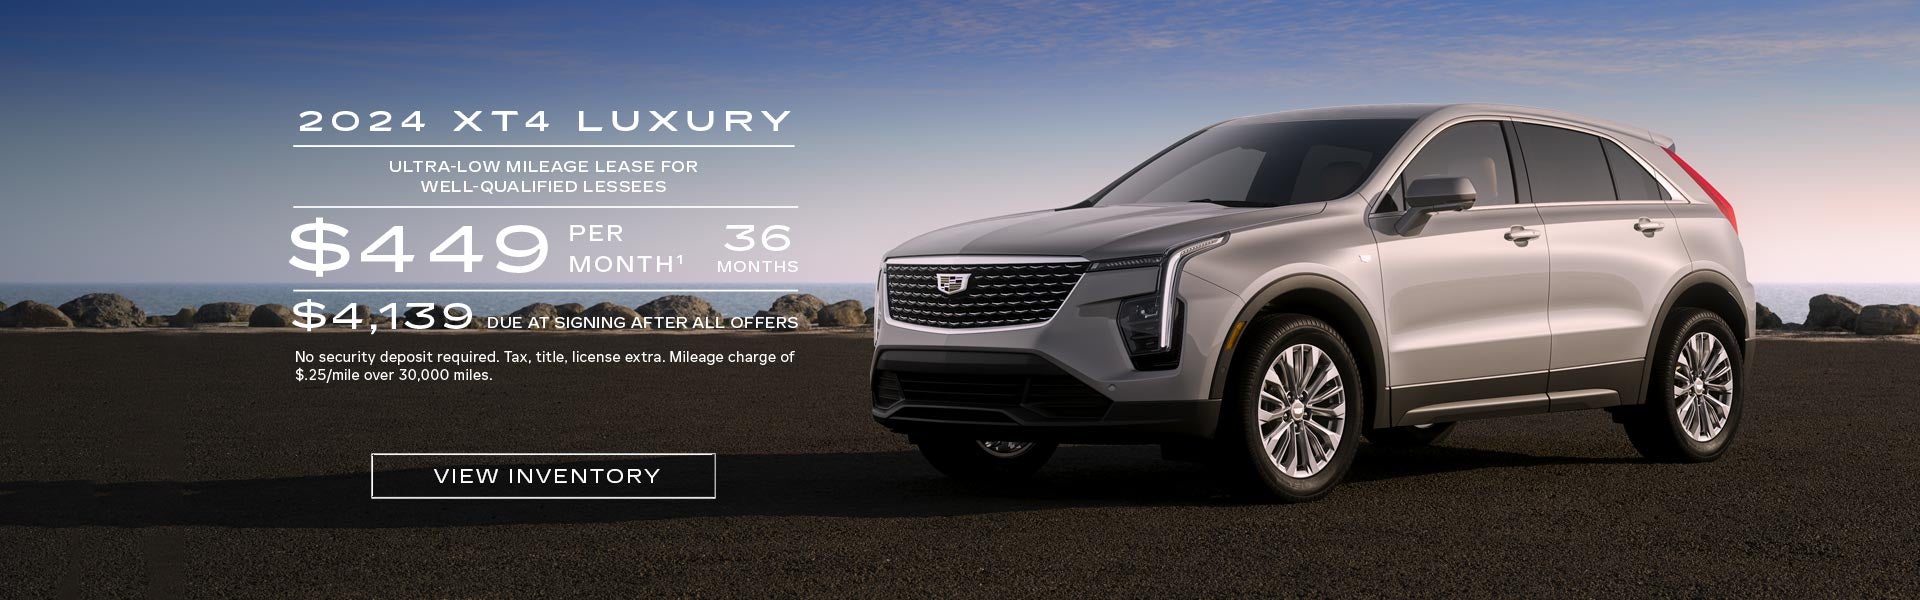 2024 XT4 Luxury. Ultra-low mileage lease for well-qualified Lessees. $449 per month. 36 months. $...